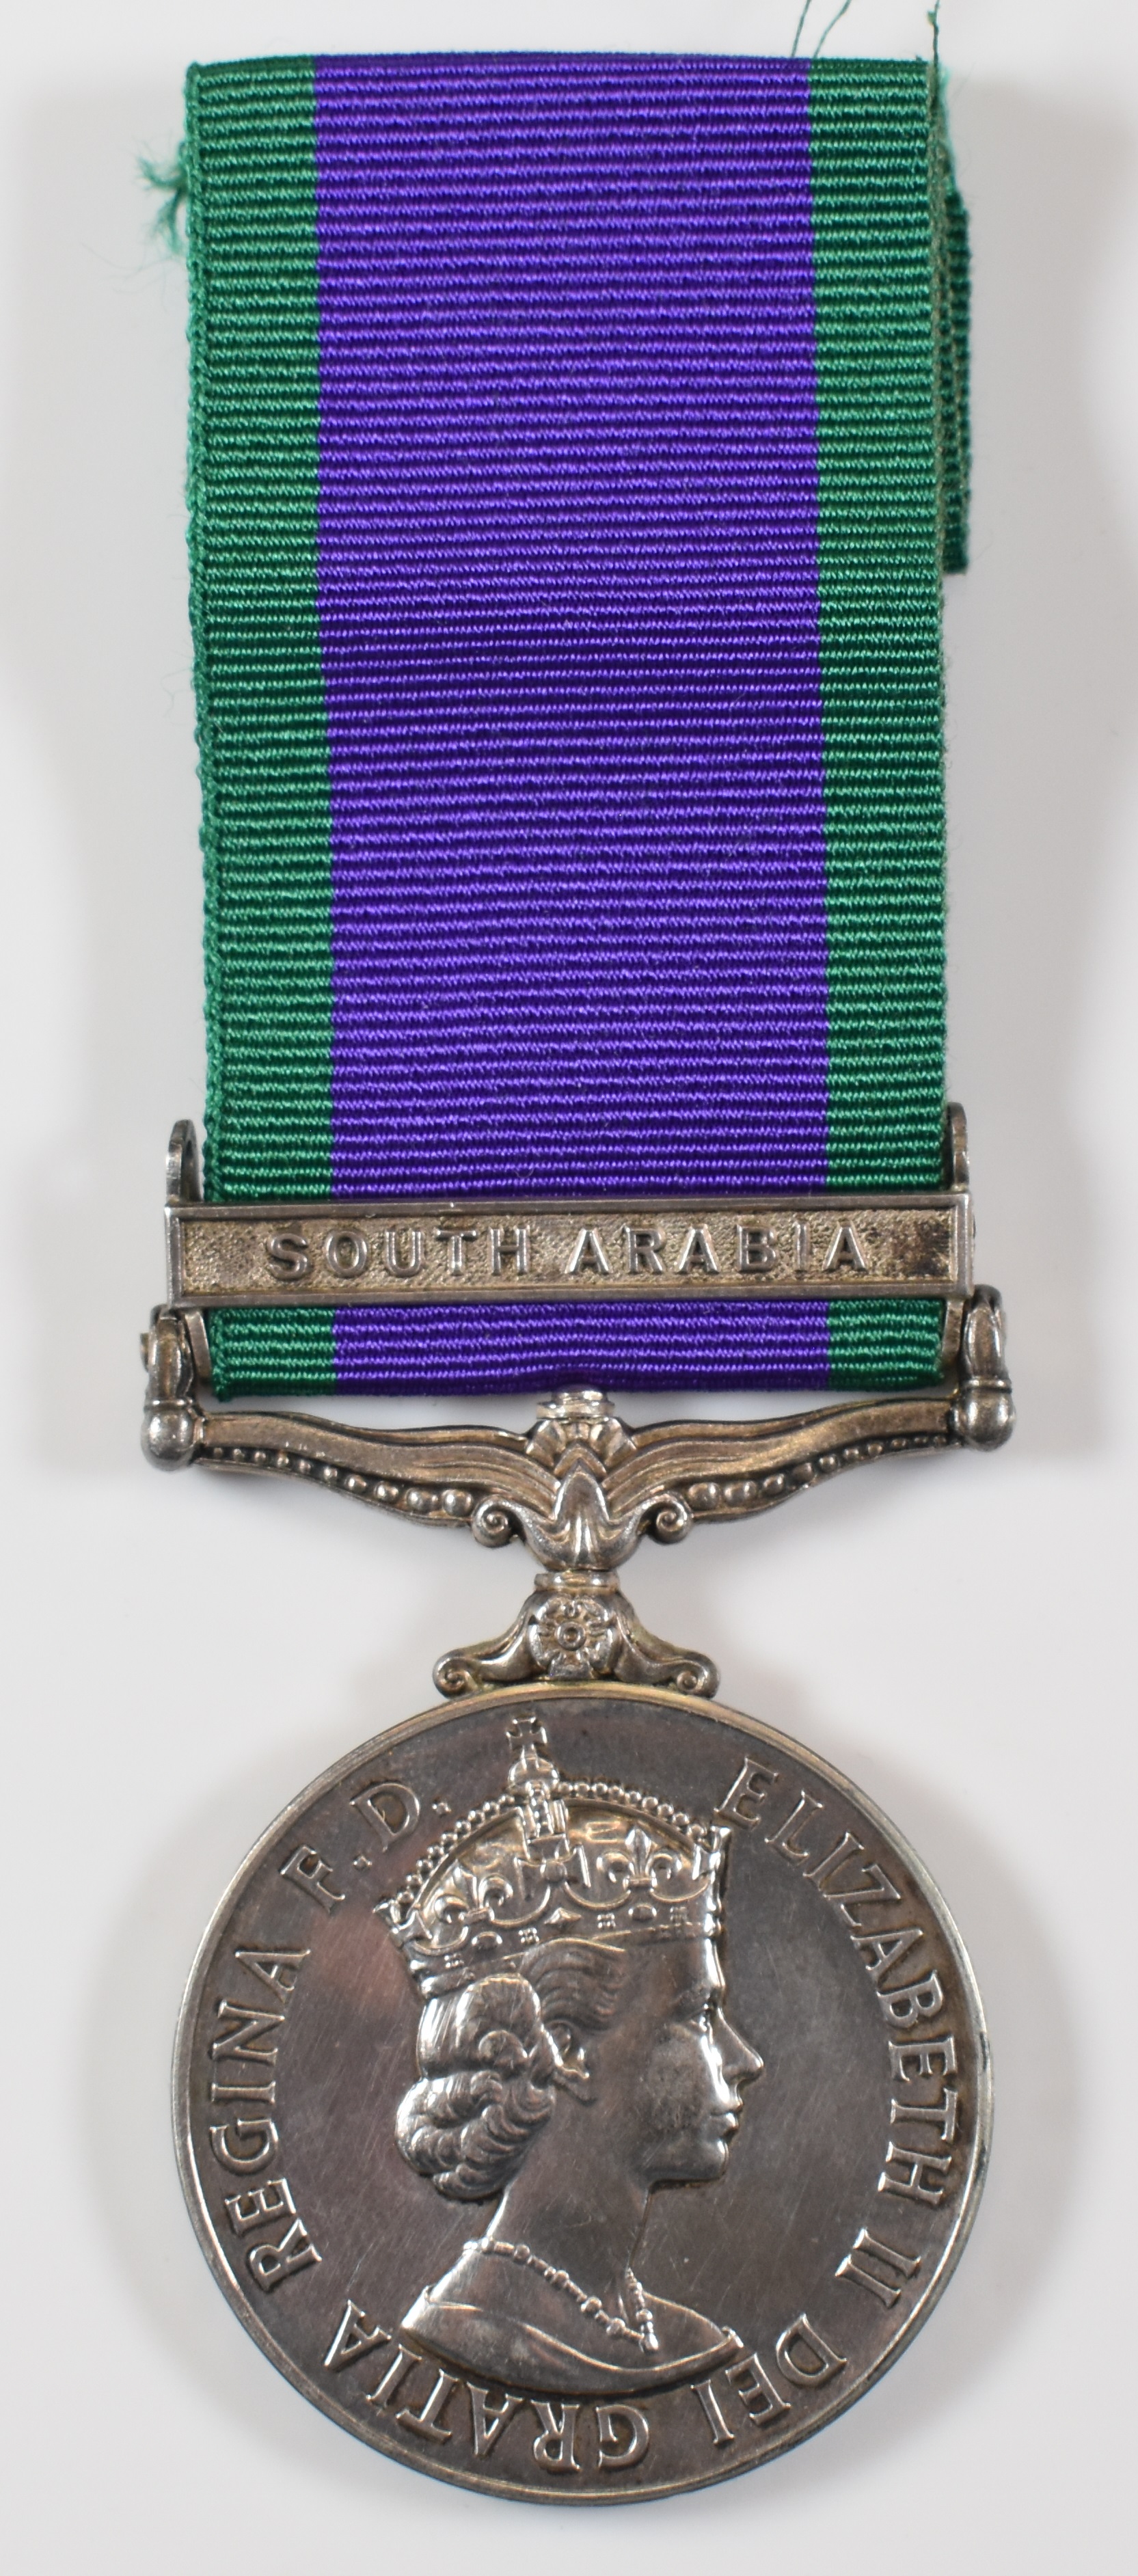 Royal Air Force Elizabeth II General Service Medal with clasp for South Arabia named to 0687895